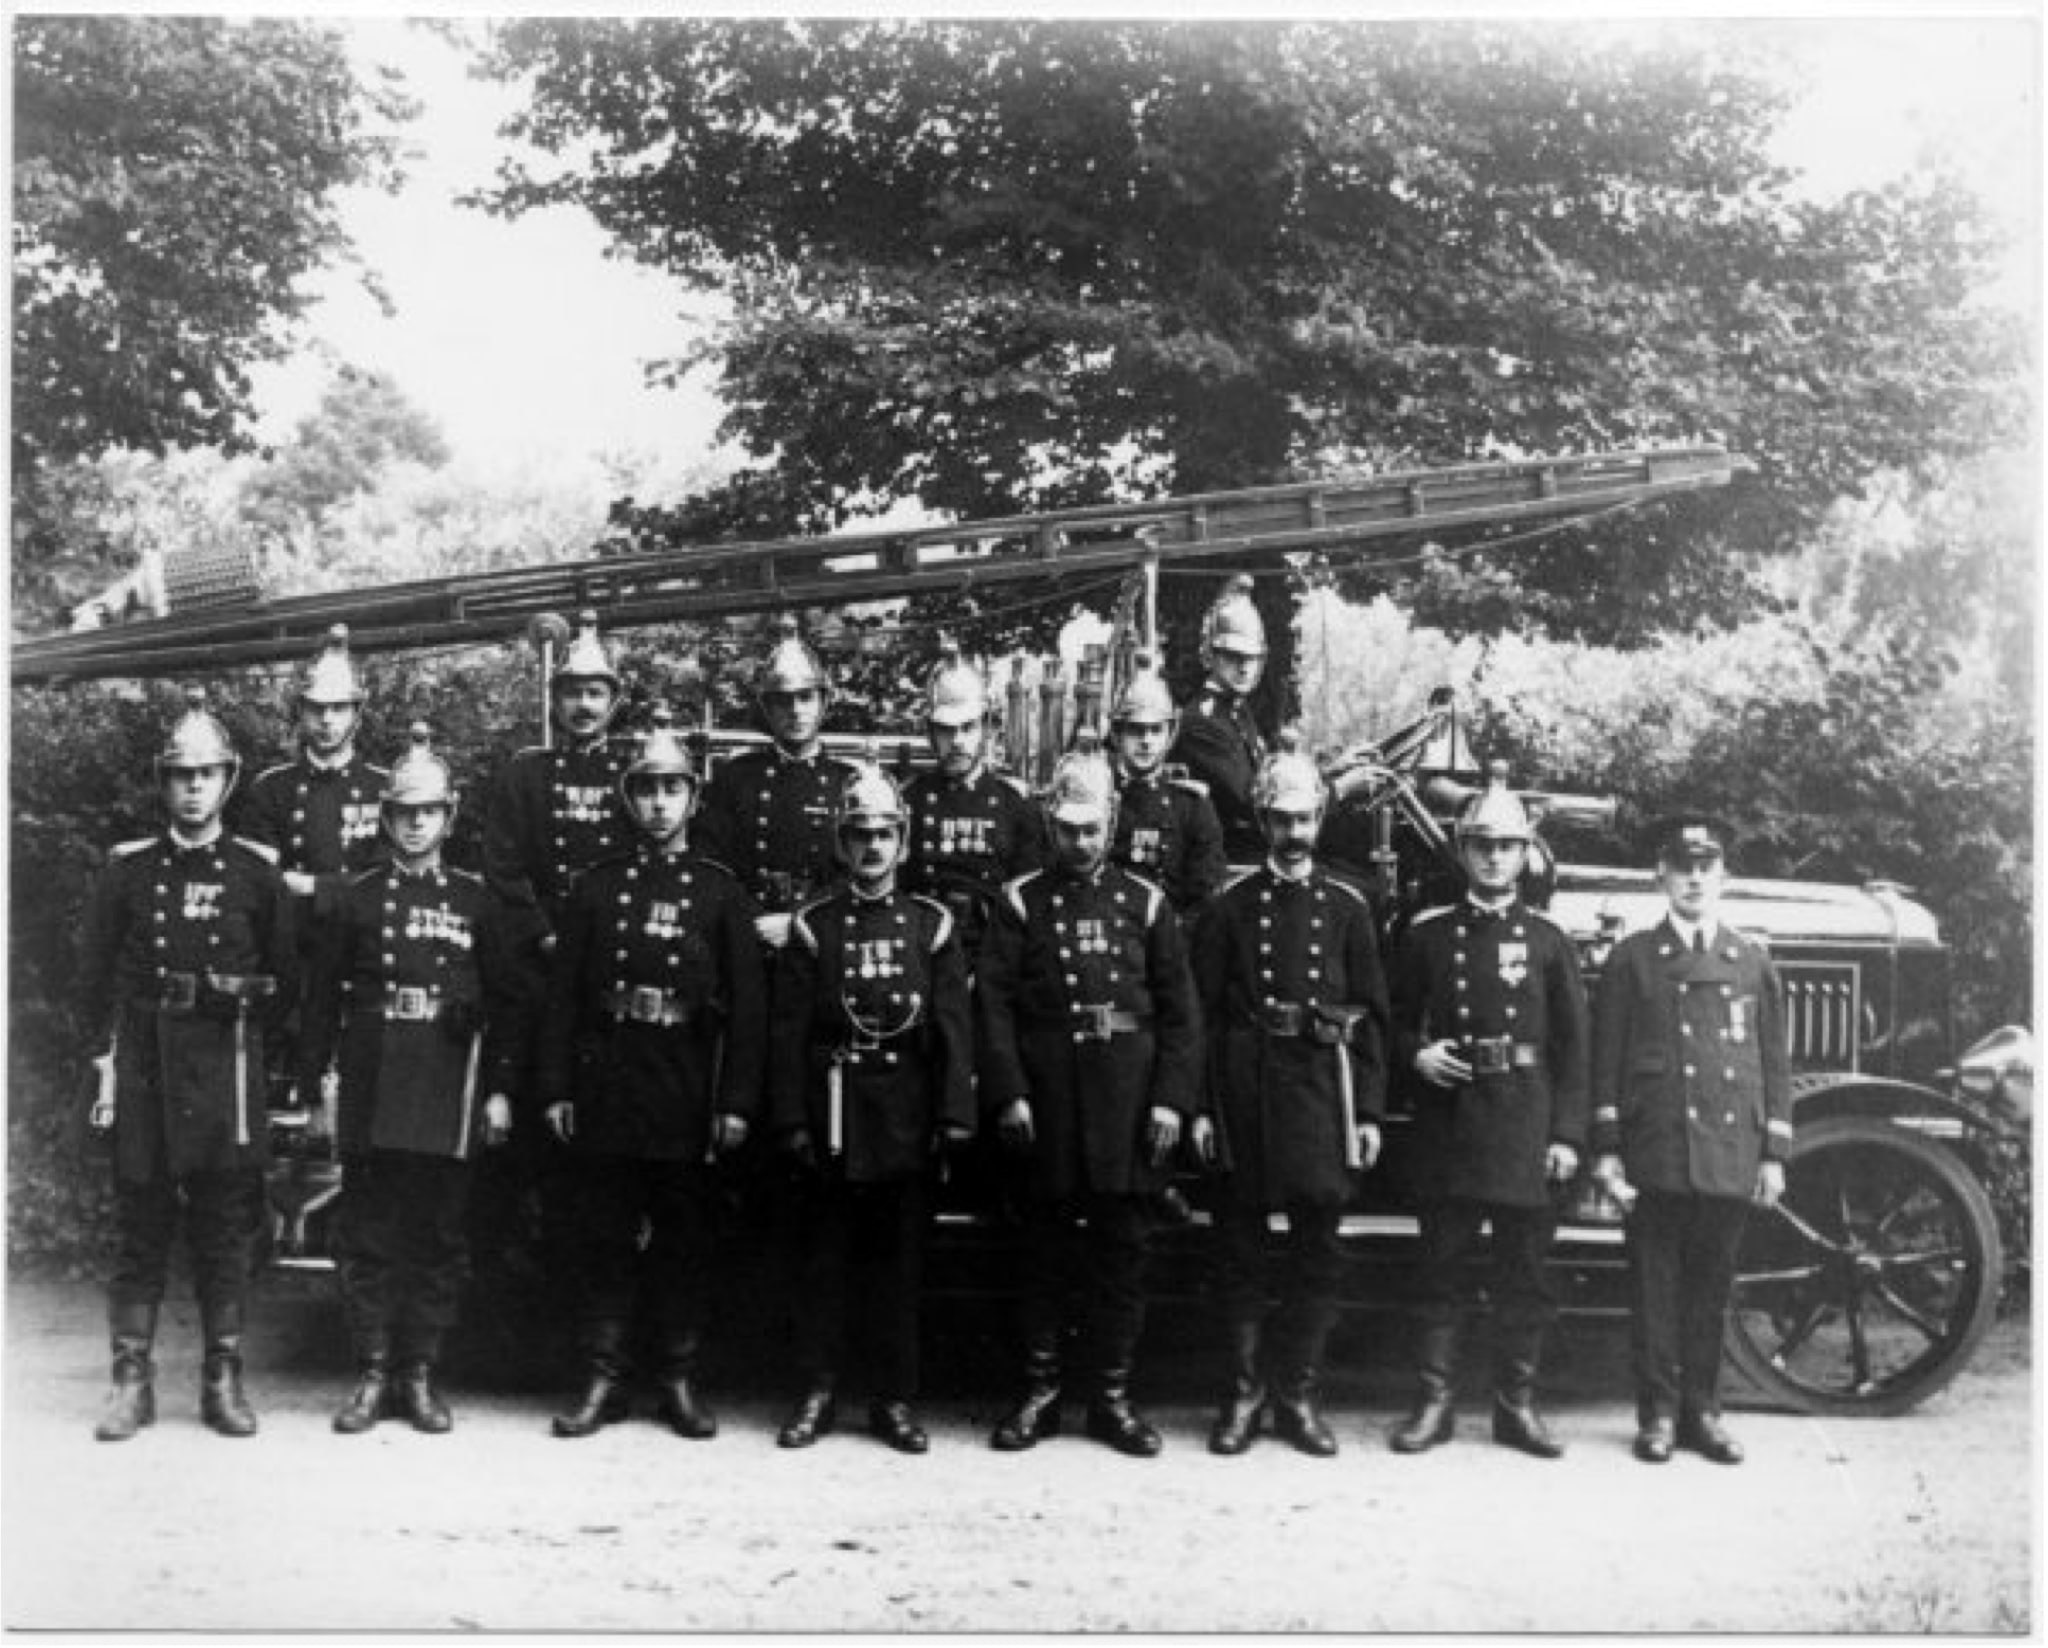 A black and white photo of fire men standing in front of the first motorised fire engine